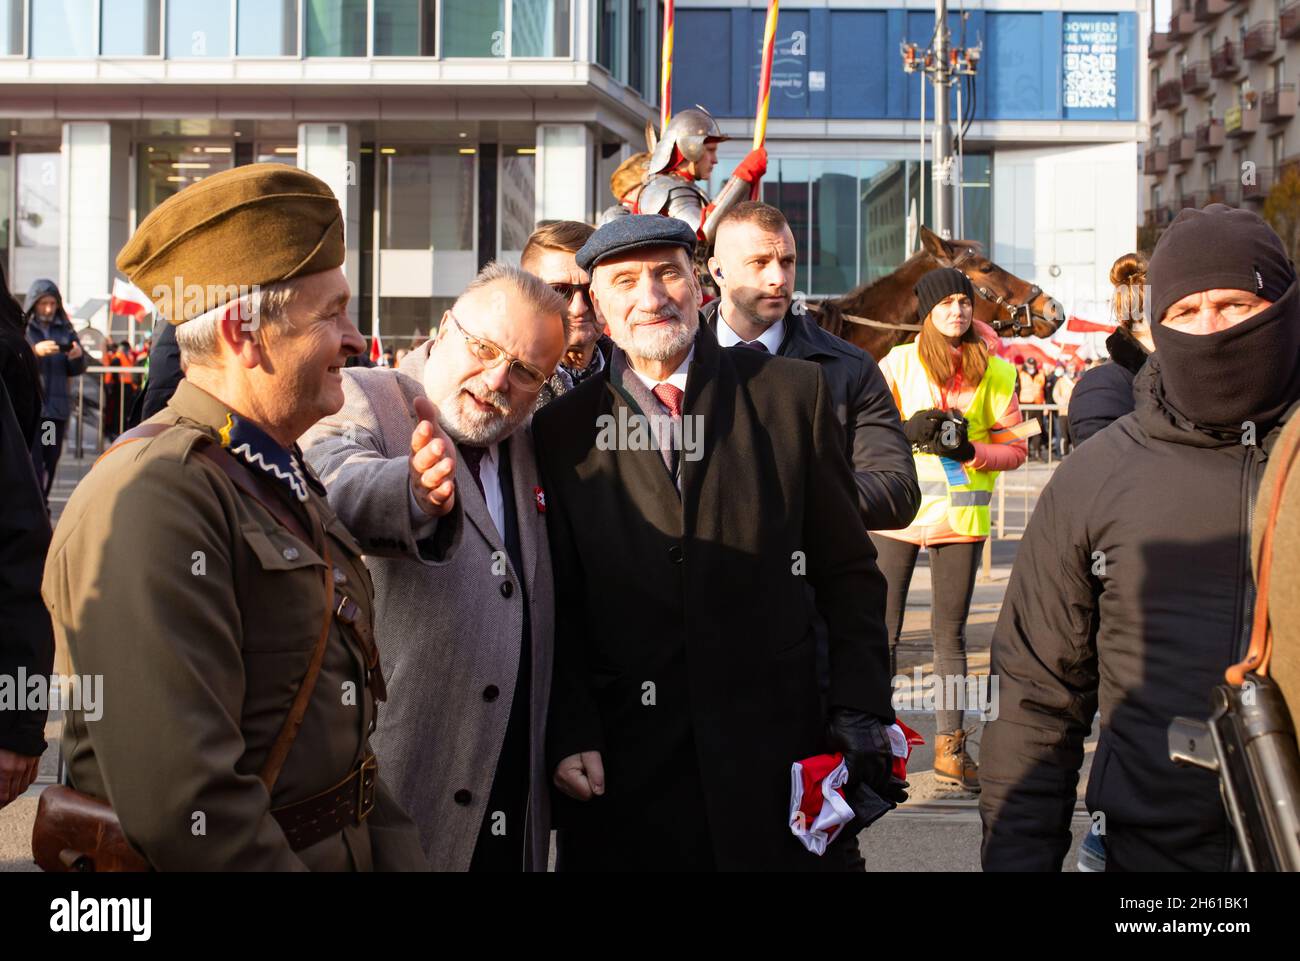 Warszawa, Poland - 11.11.2021: Antoni Macierewicz on the Independece March. National feast and Political conflict dividing the society. Stock Photo